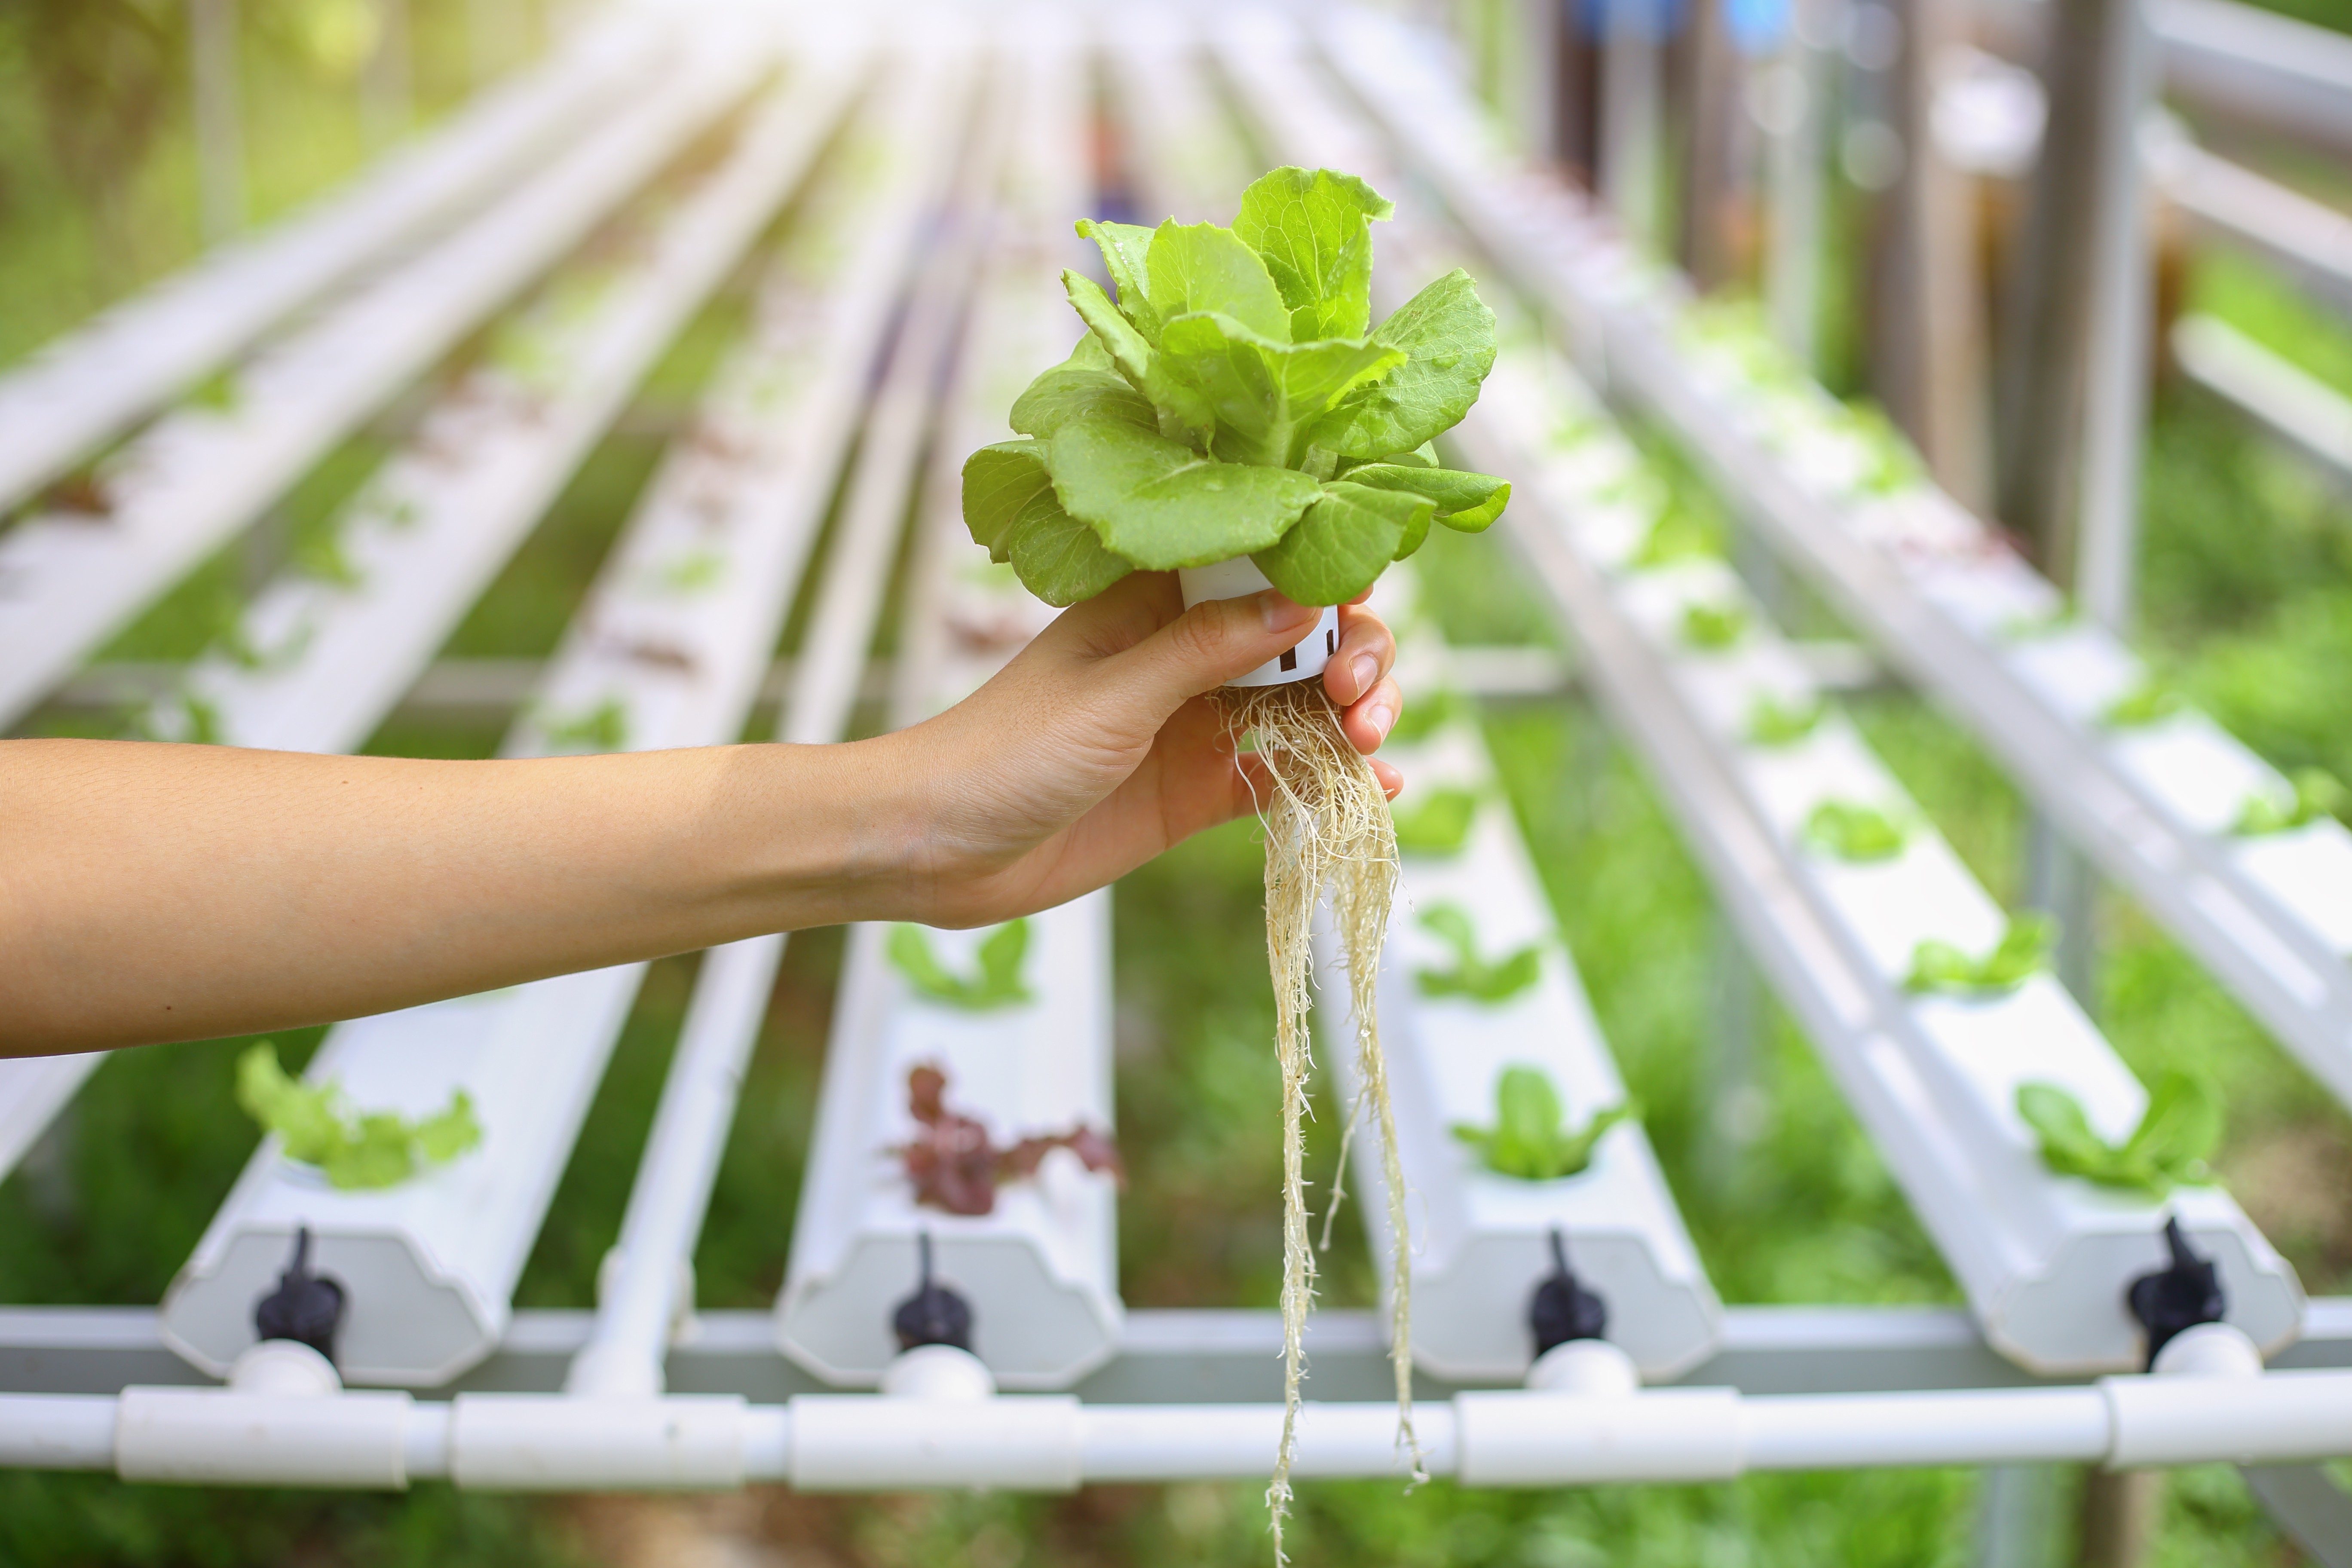 Japanese experts make a breakthrough in farming technology, using polymer film to grow food